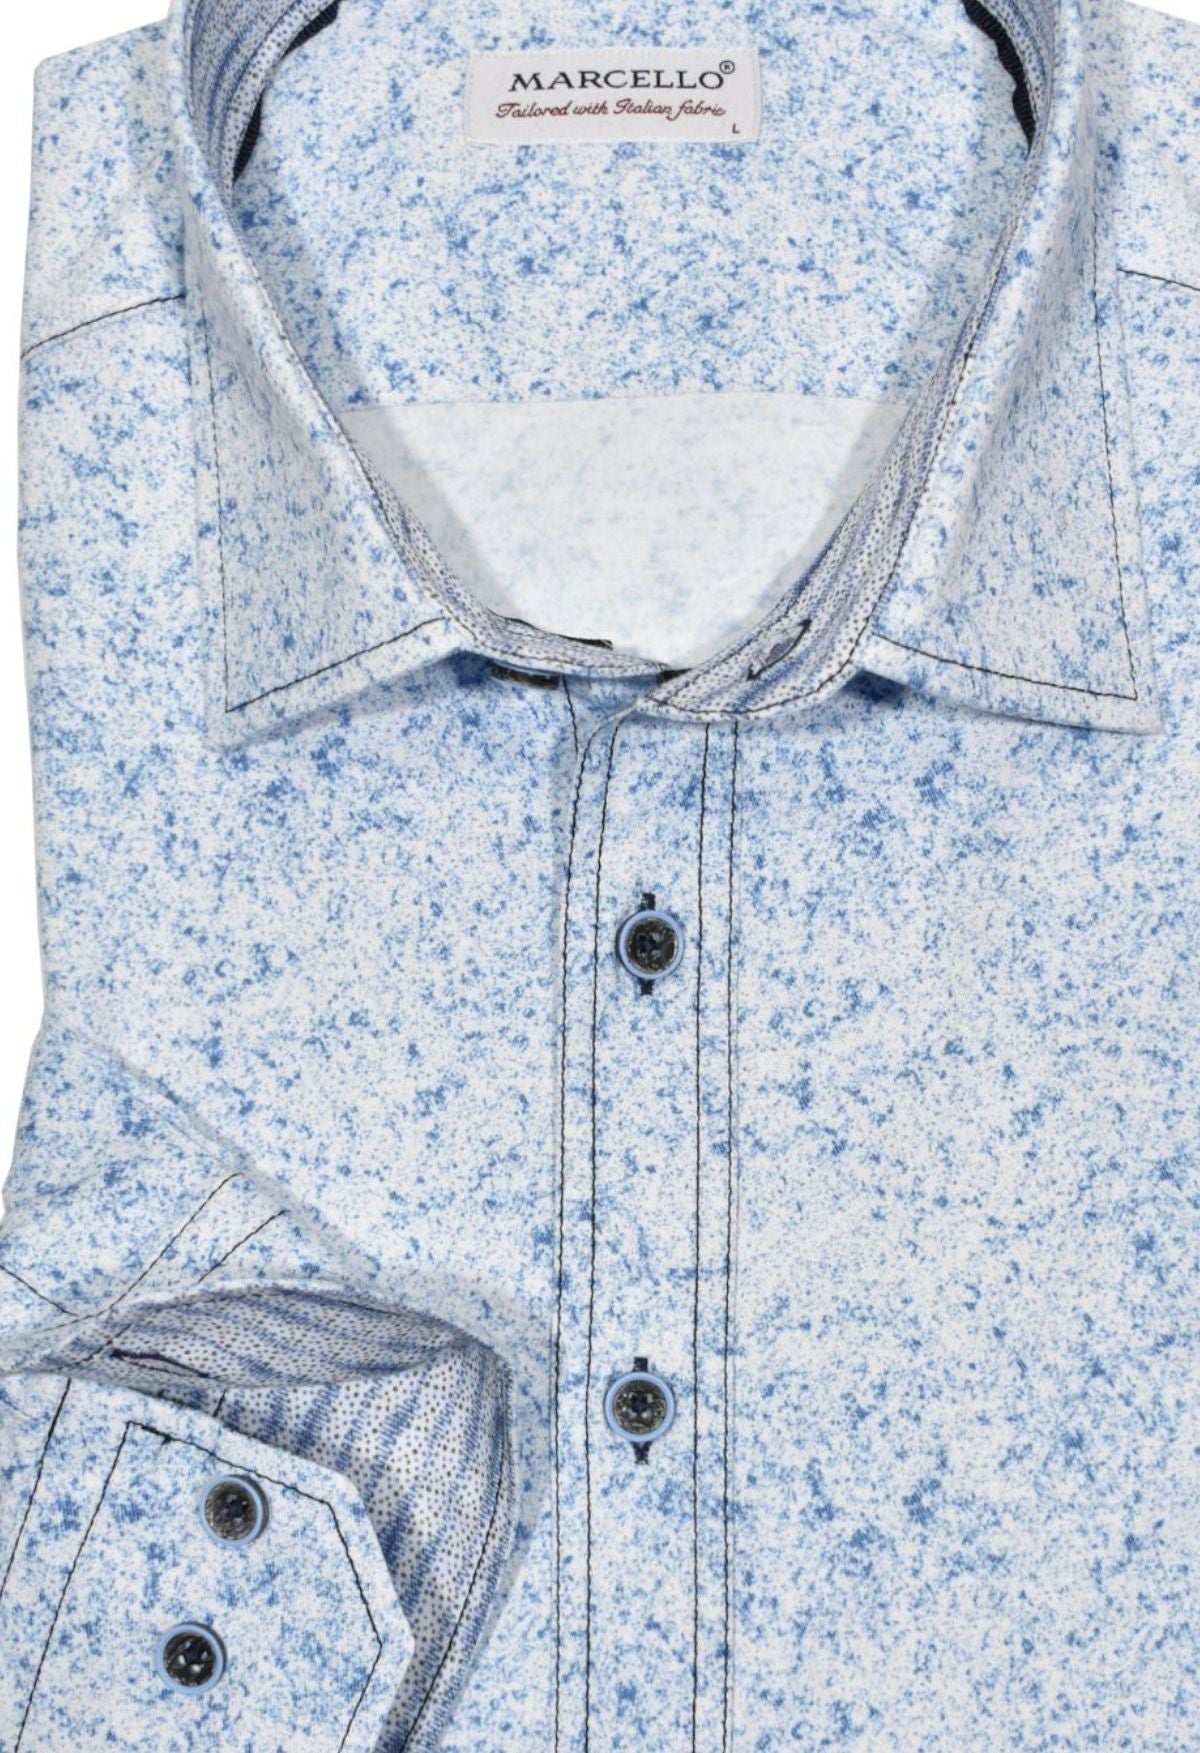 Feel relaxed and ready to take on the day with our W806 Soft Sky Print Shirt. Its abstract pattern is designed to look like a clear blue sky on a perfect day, bringing a sense of serenity to your wardrobe. The muted blue shades make it easy to pair with your favorite trousers and jeans, while double track contrast stitching, custom buttons, and matched trim fabric enhance the crisp look. Shirt by Marcello.